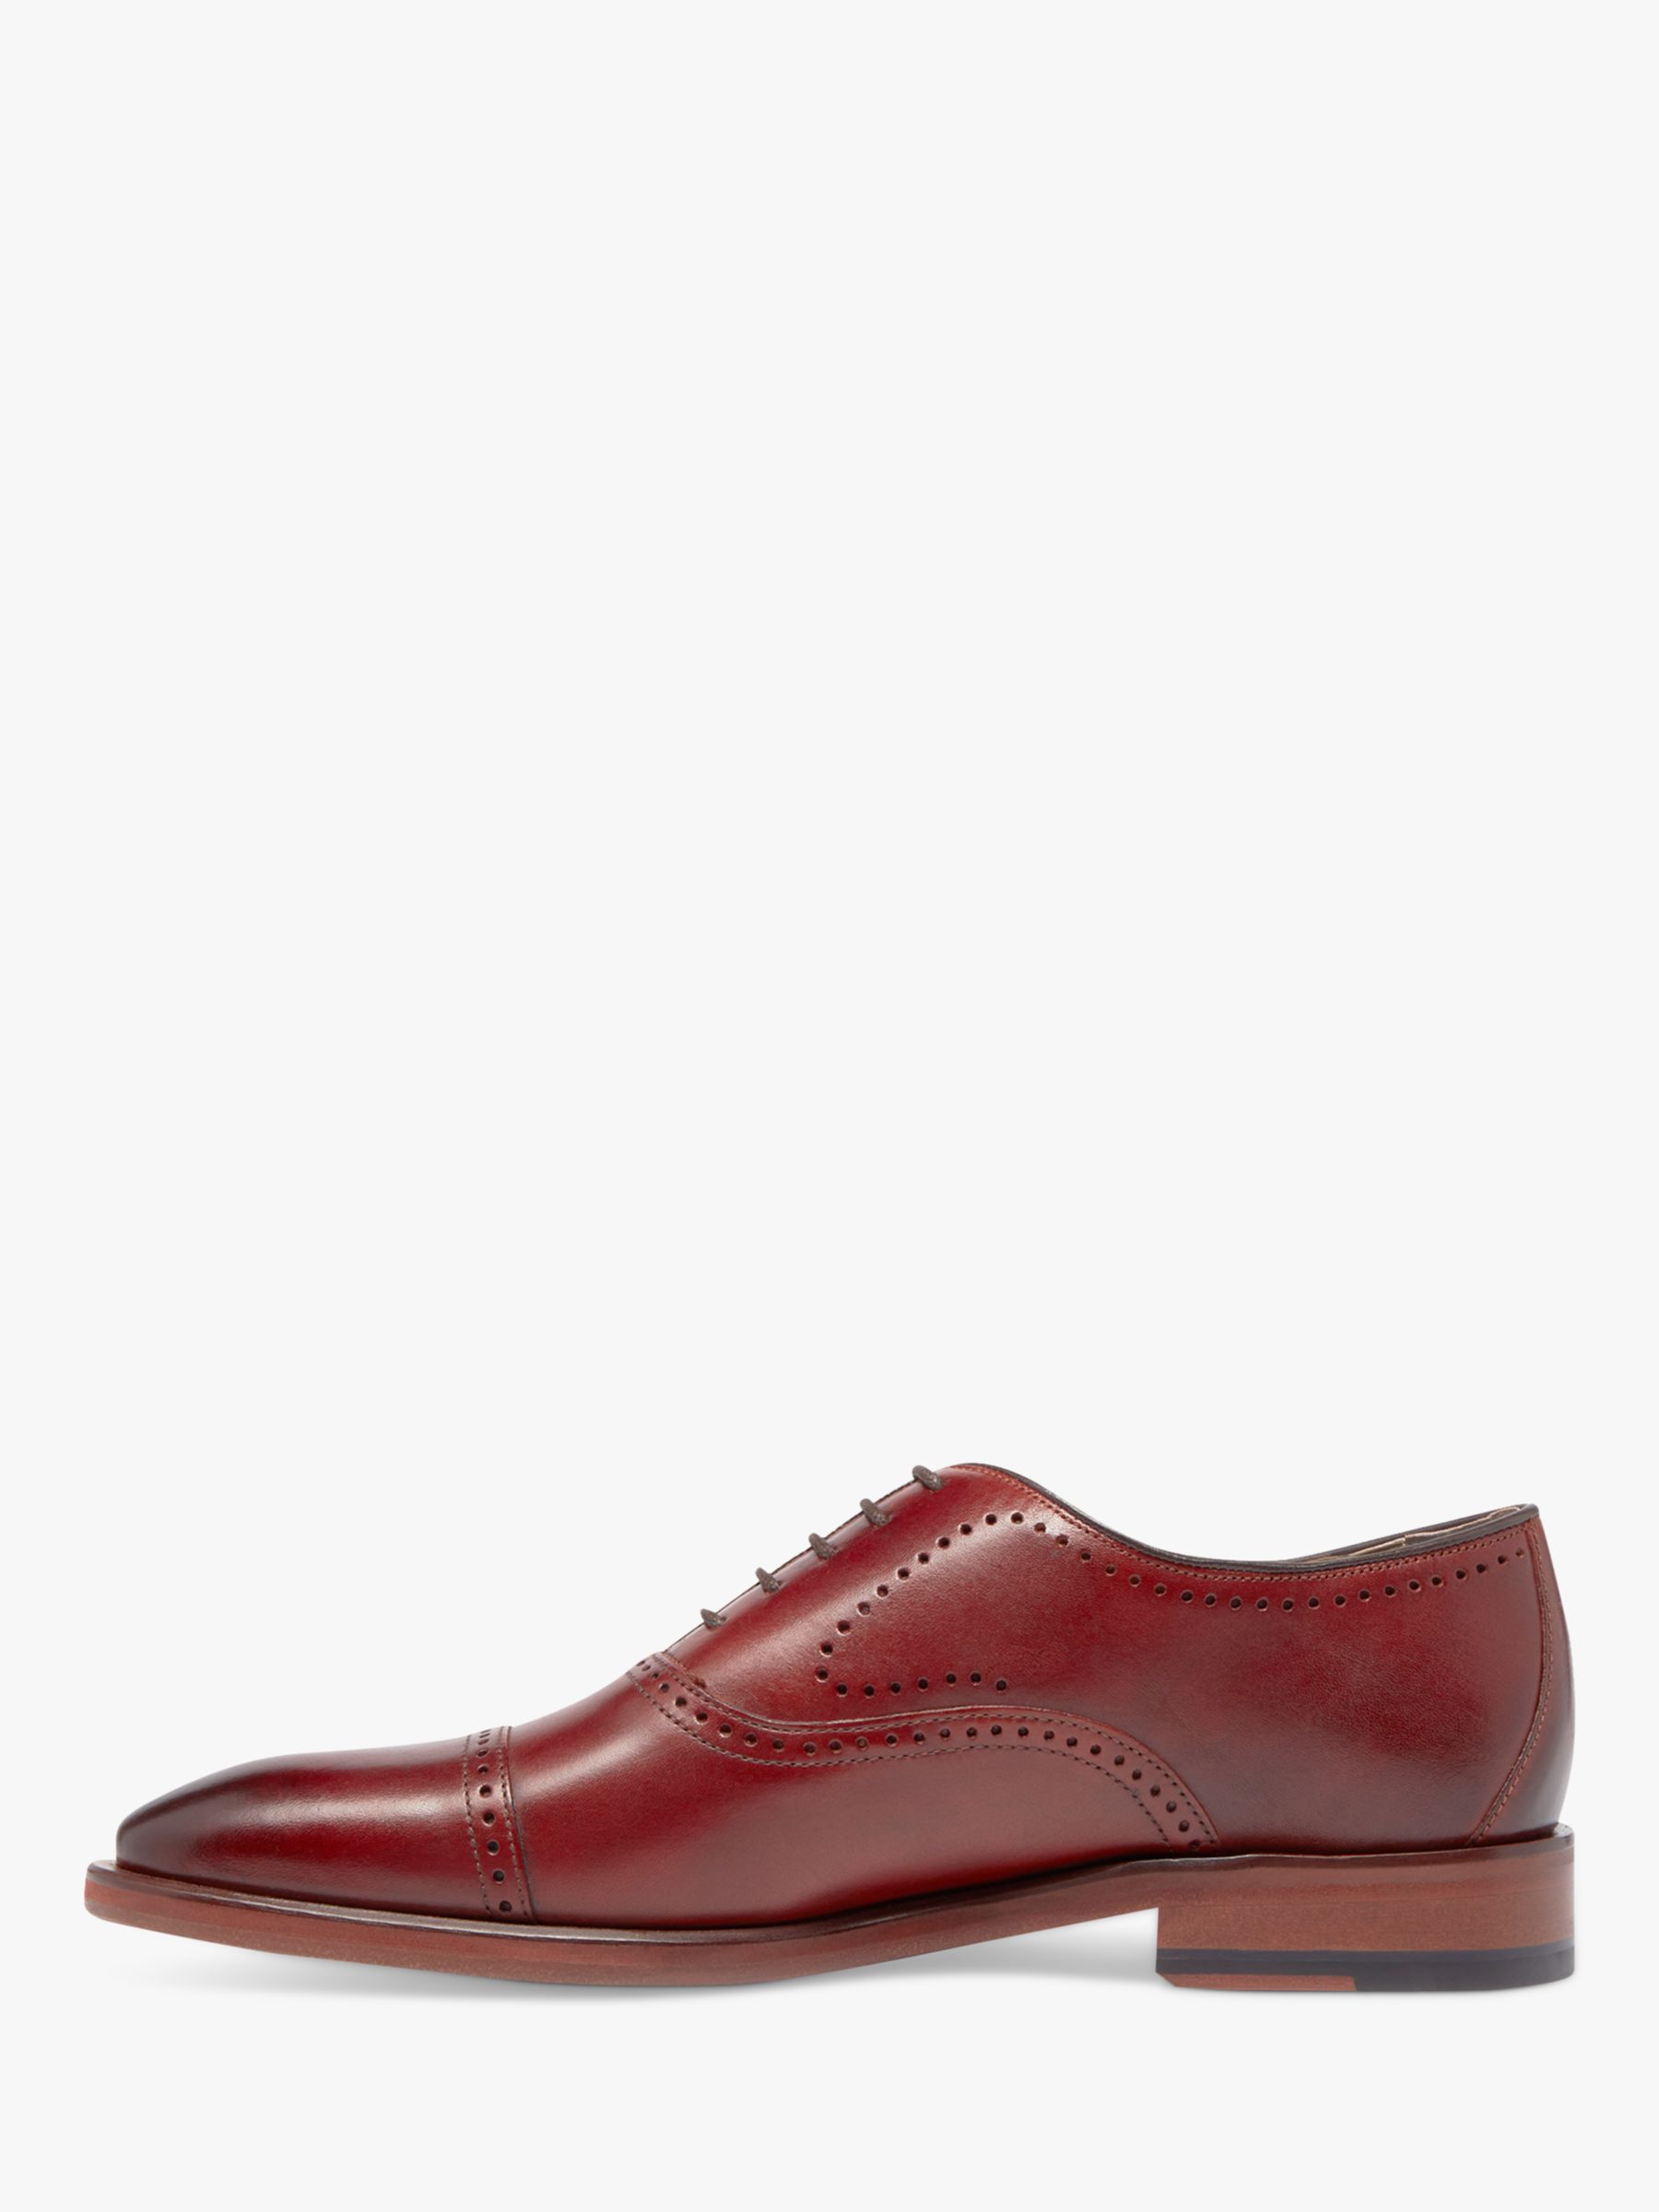 Buy Oliver Sweeney Mallory Oxford Shoes, Tan Online at johnlewis.com